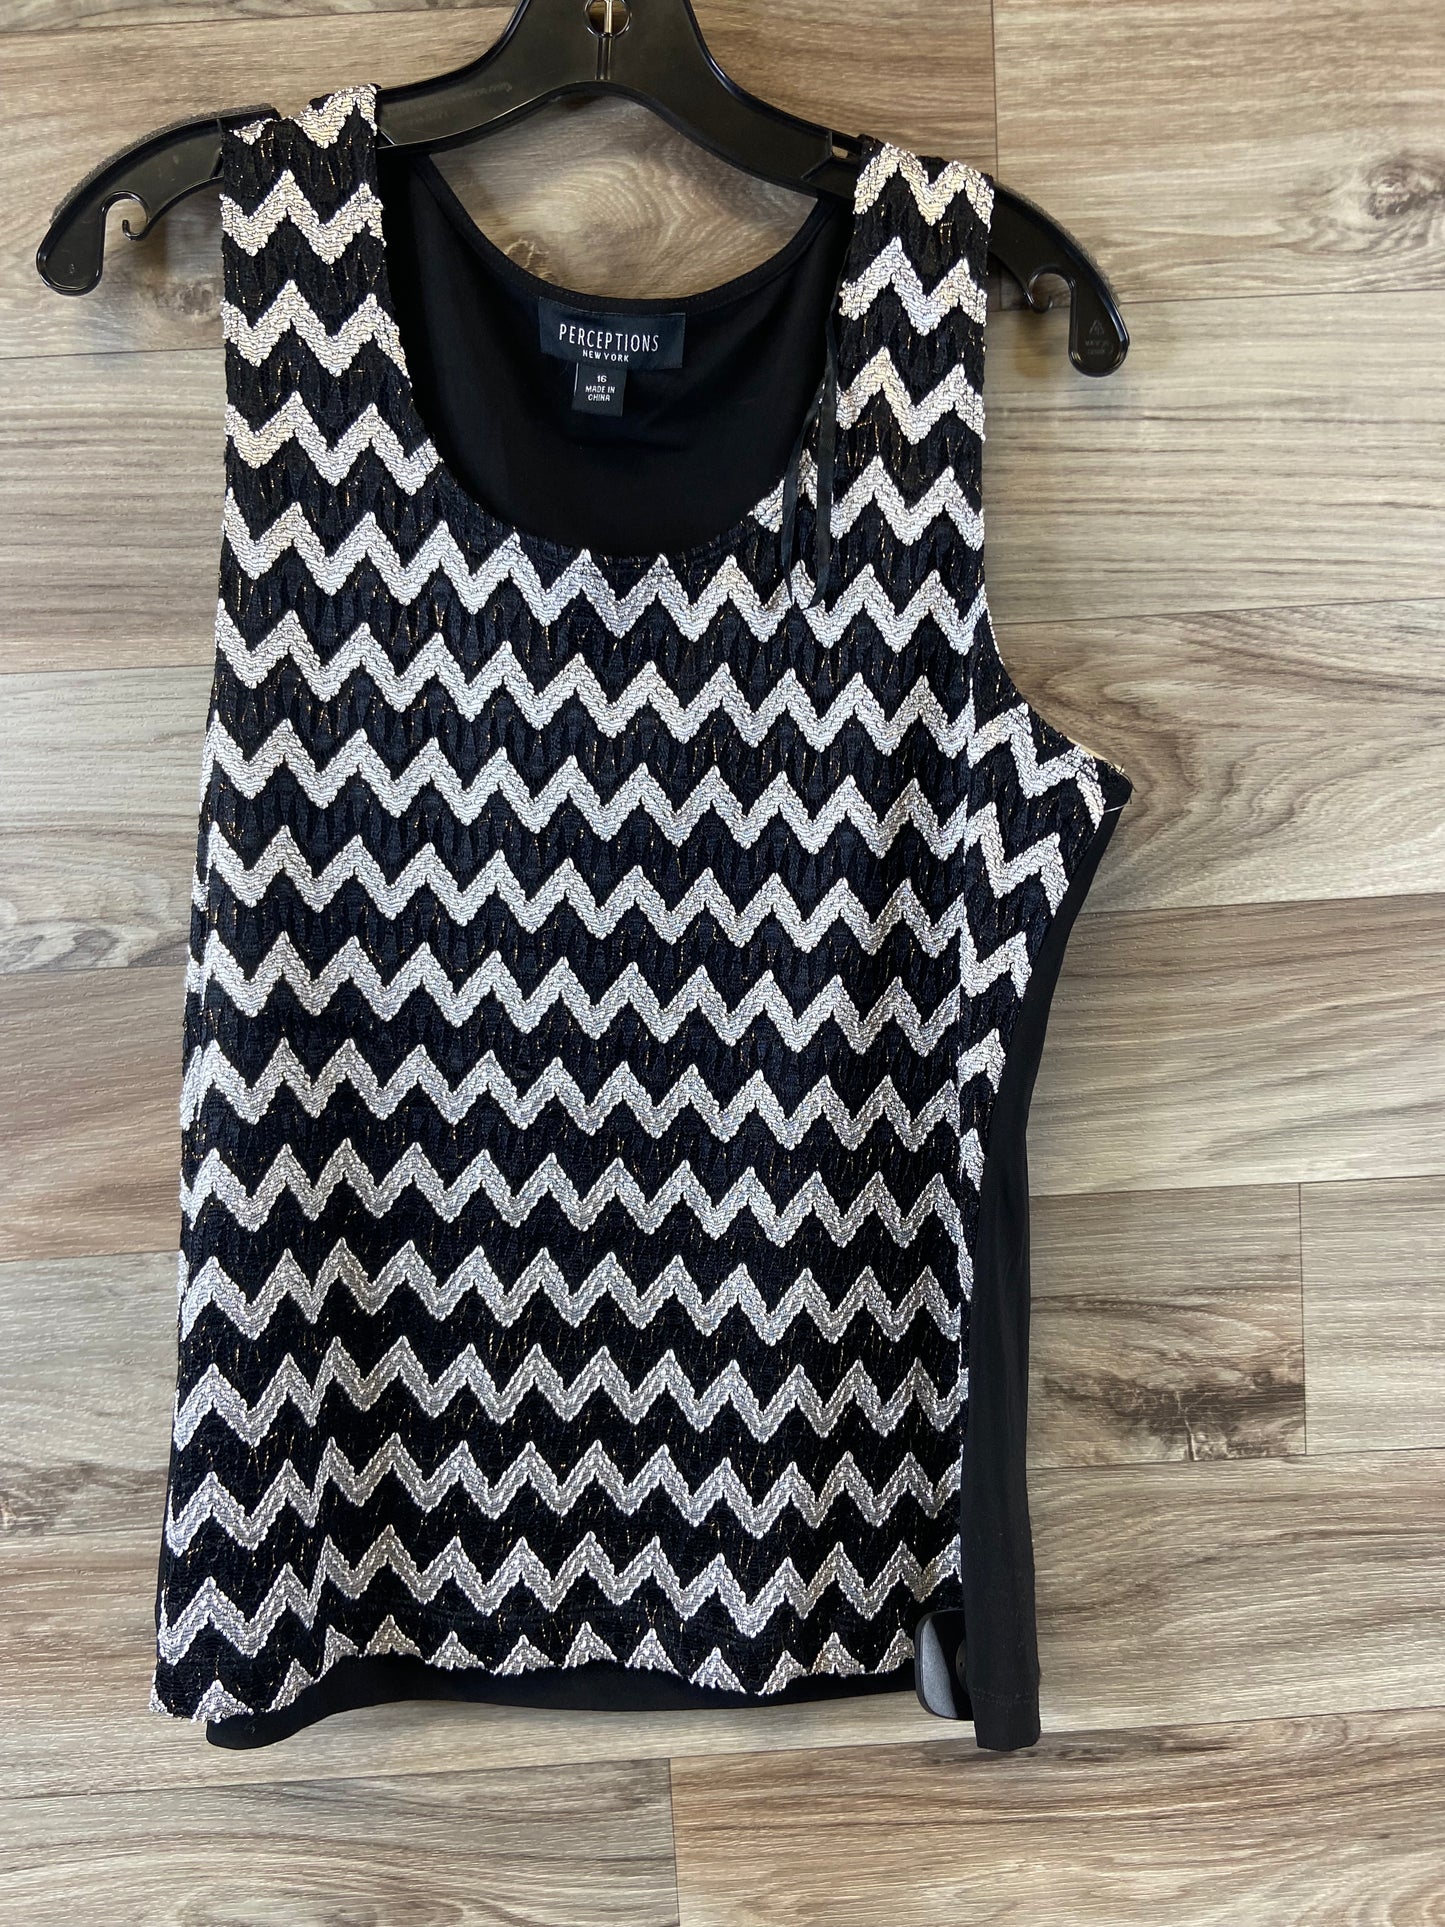 Top Sleeveless By Perceptions  Size: Xl